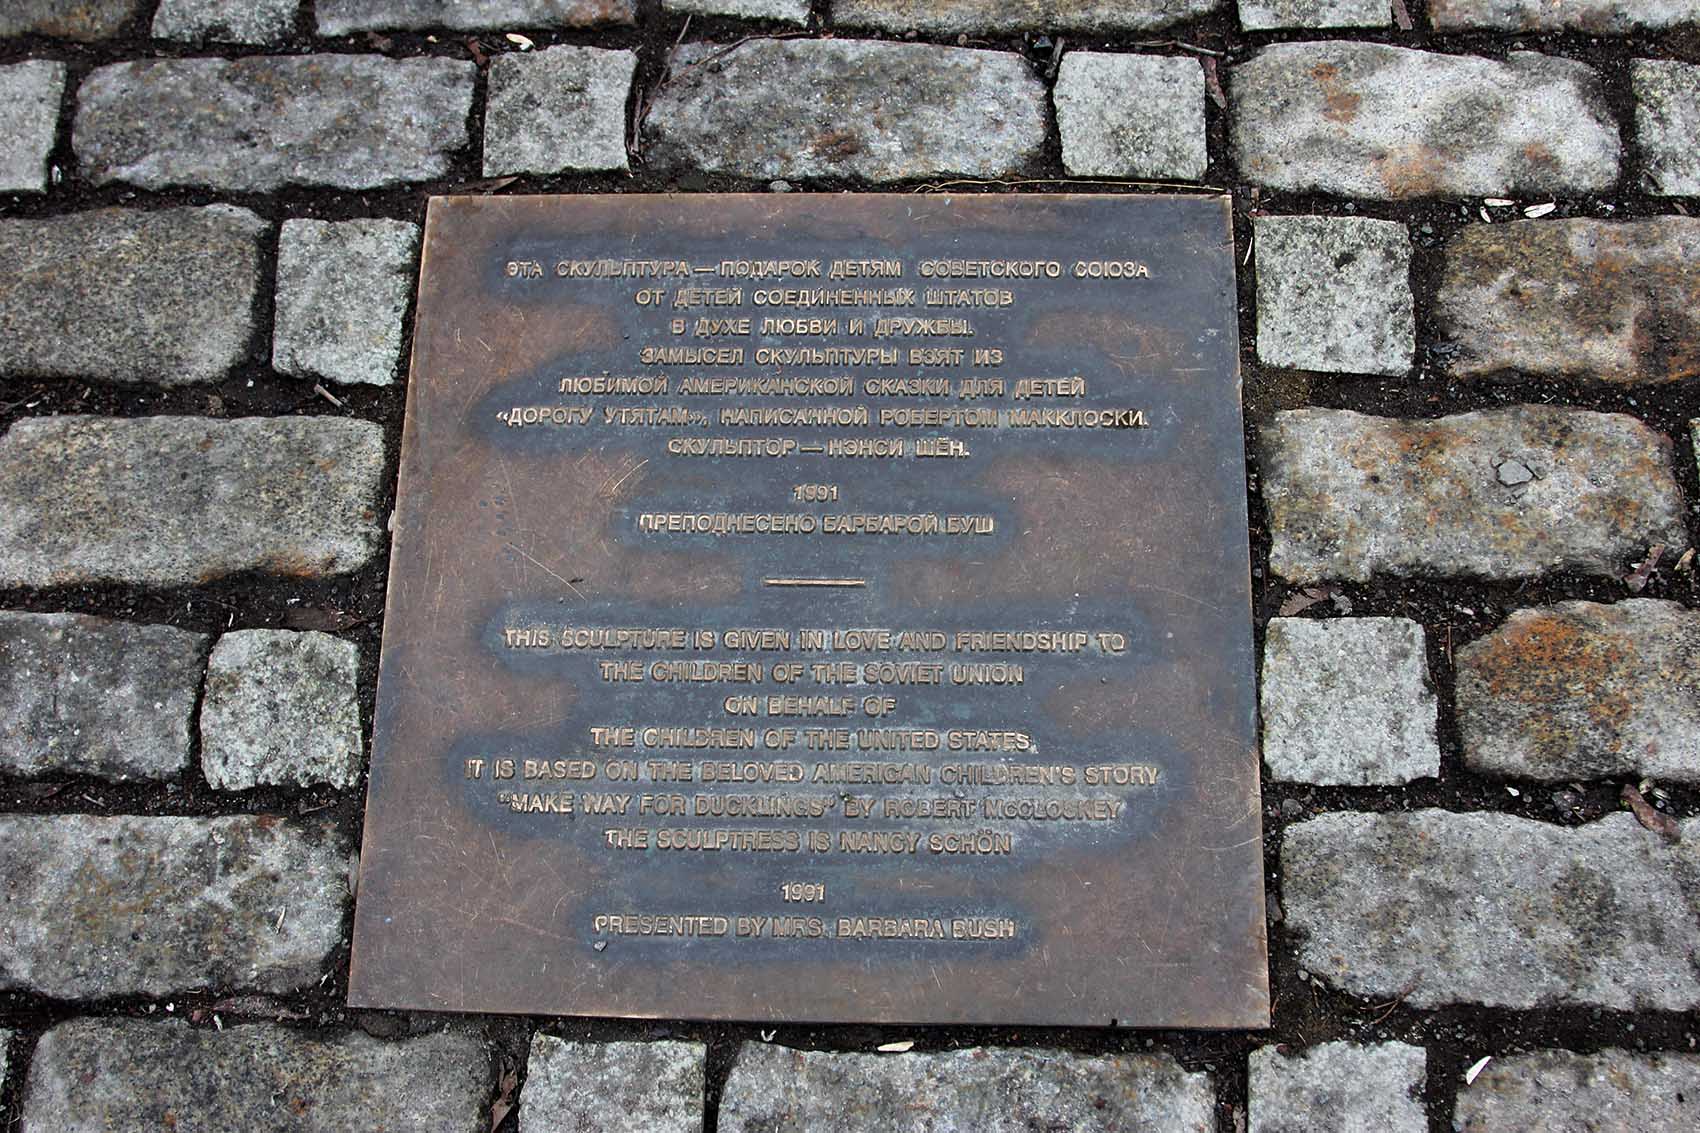 Written in both English and Russian, a plaque commemorates the Russian &quot;Duckling&quot; exchange from the U.S. to the U.S.S.R. (Courtesy Dmitry Avdoshin)